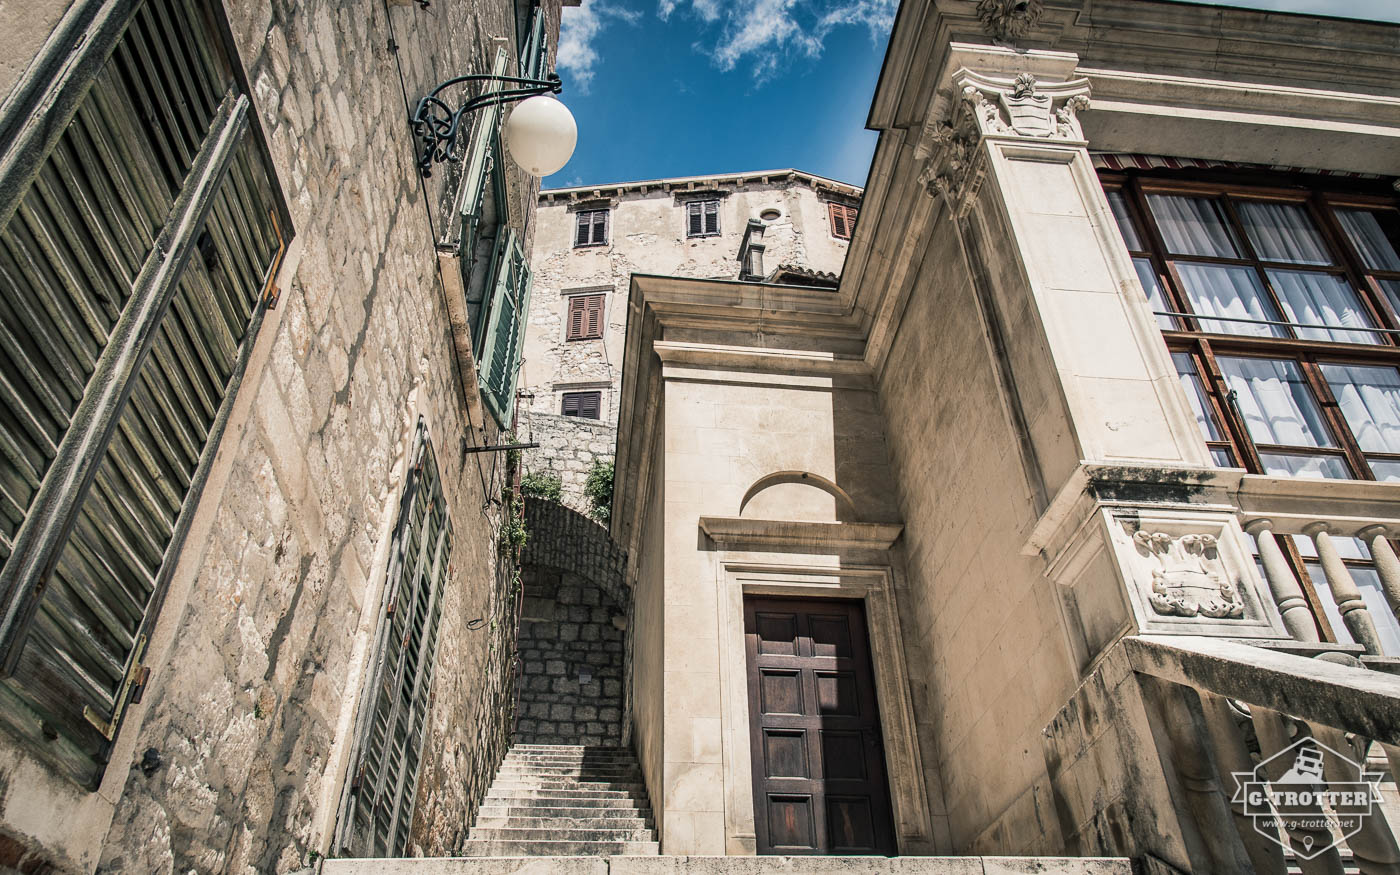 On the trail of Game of Thrones in Sibenik.